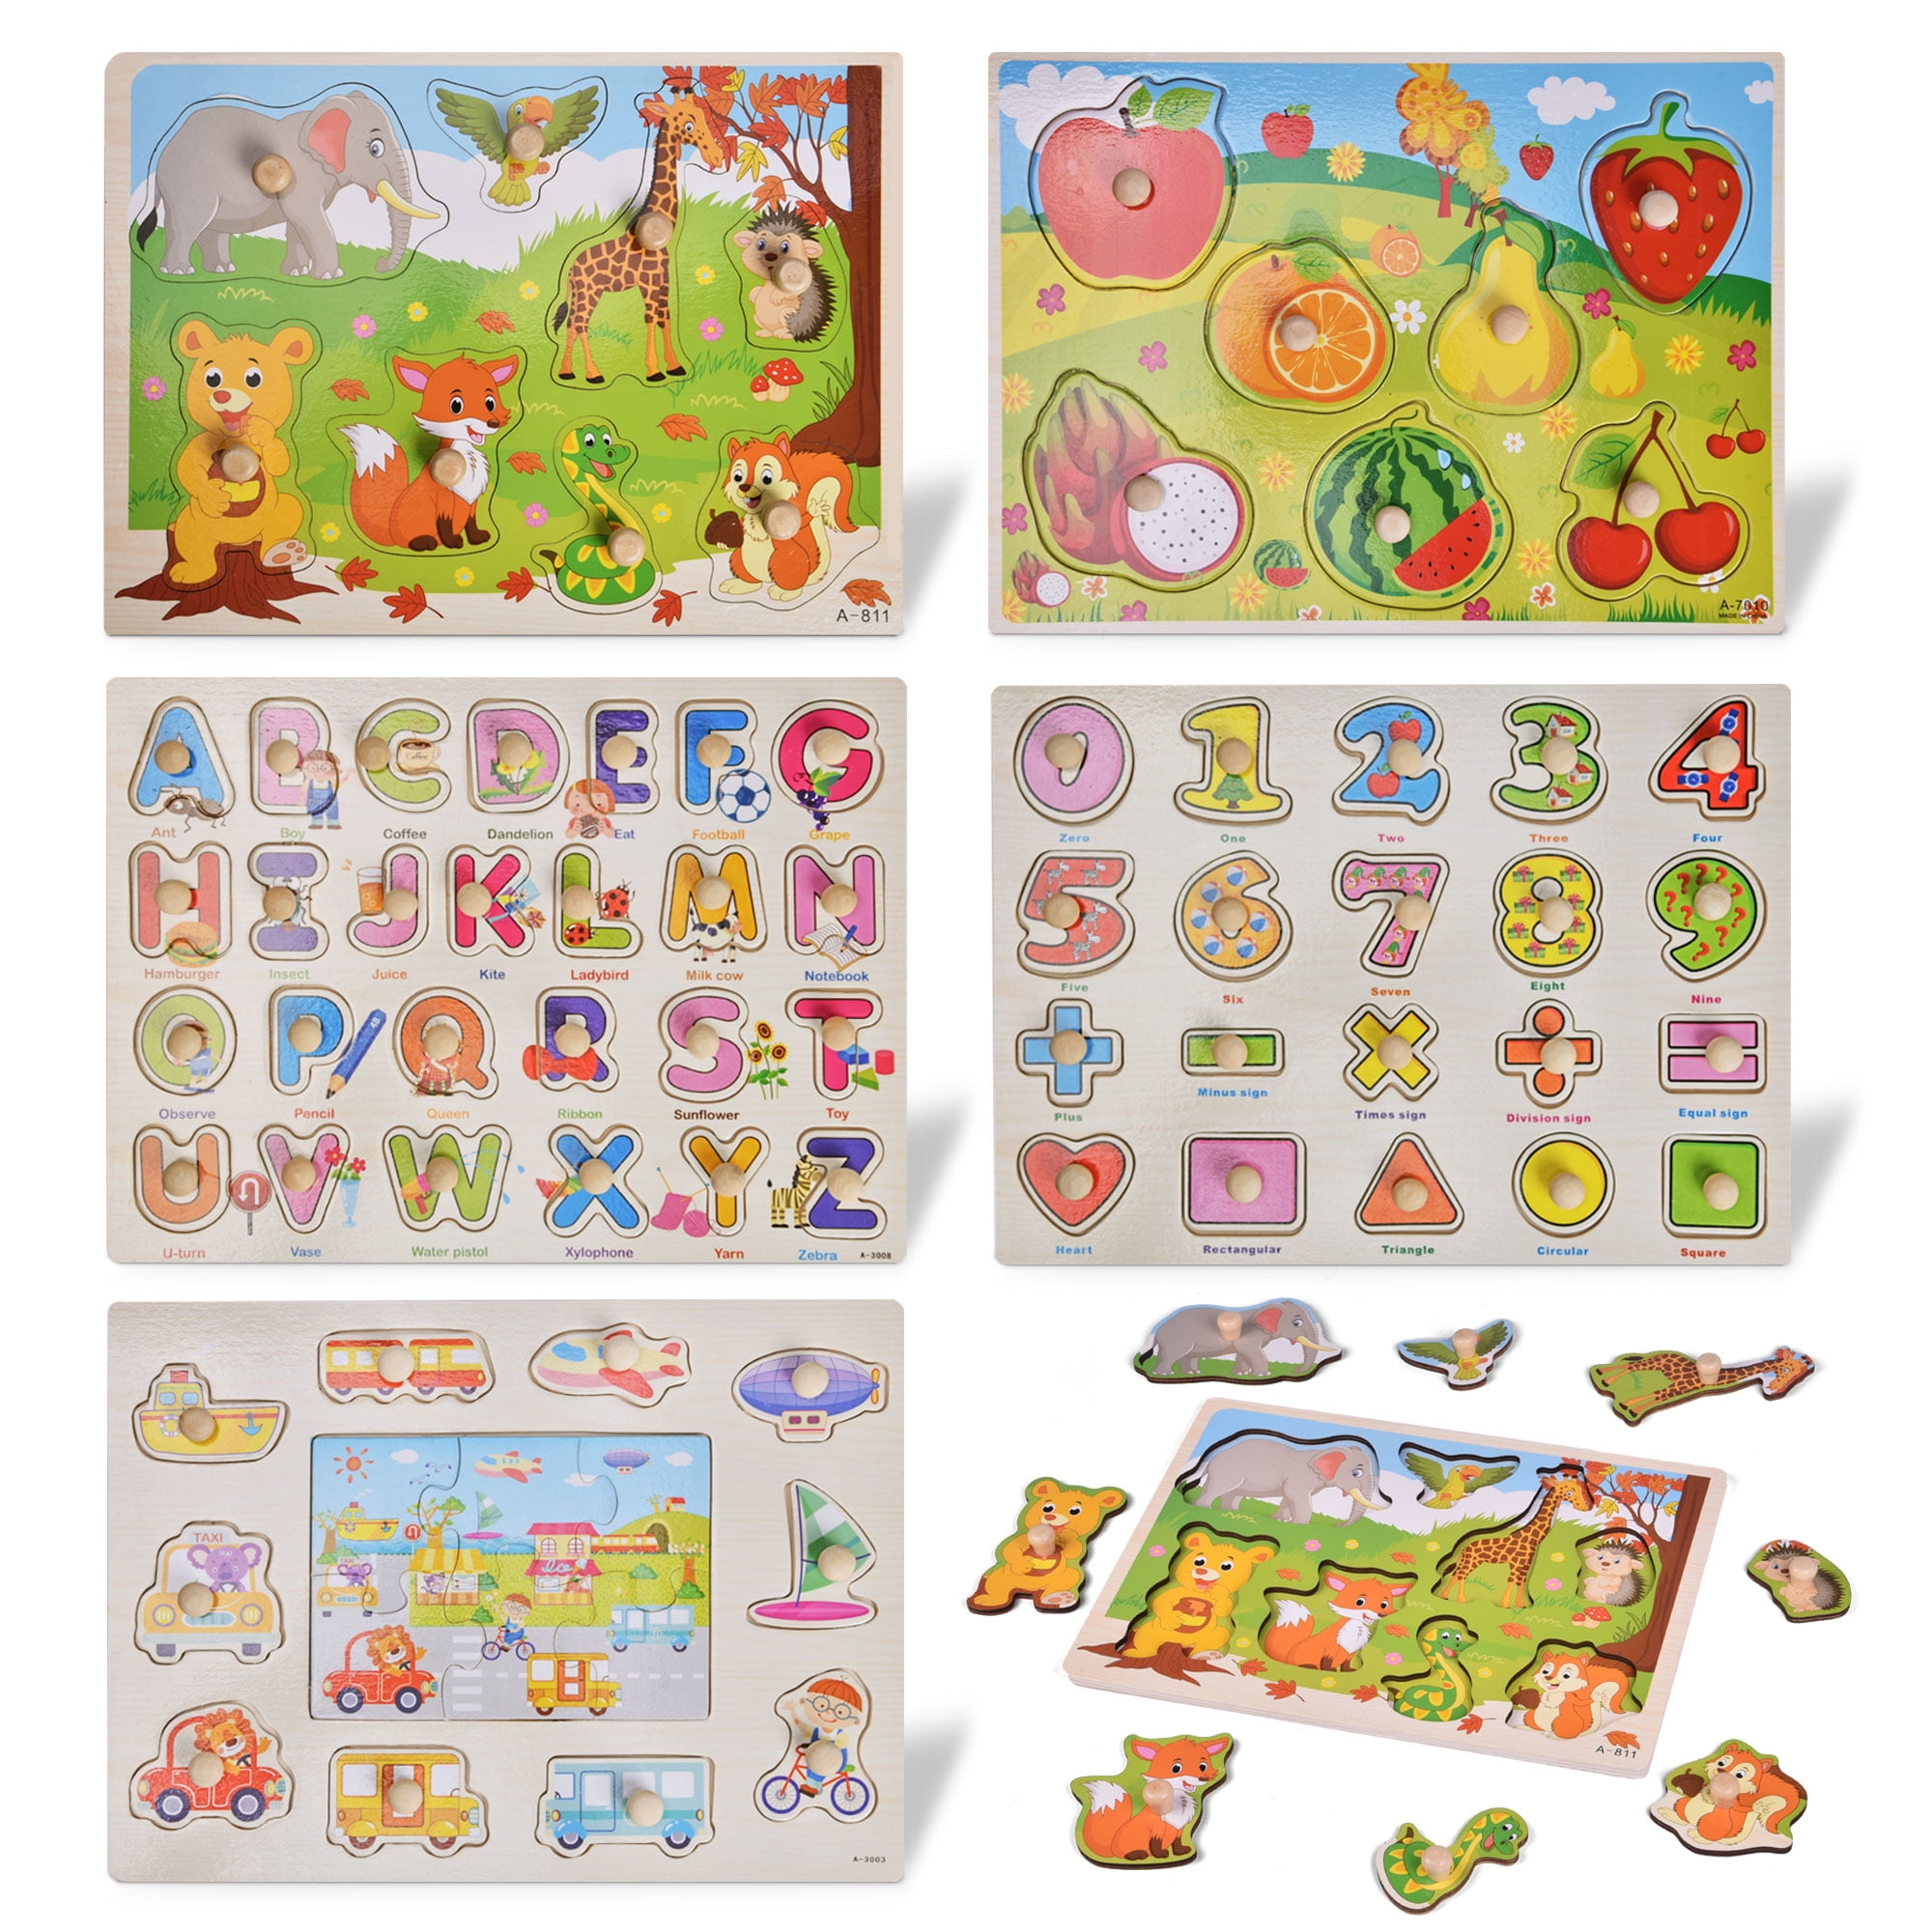 Muxihosn Home Learning Preschool Educational Development Colorful 26 Pcs Alphabets and Number Wooden Peg Puzzle Shape Toys and Games for Age 3-7 Years Old Child Kids Toddlers Baby Boys Girls 